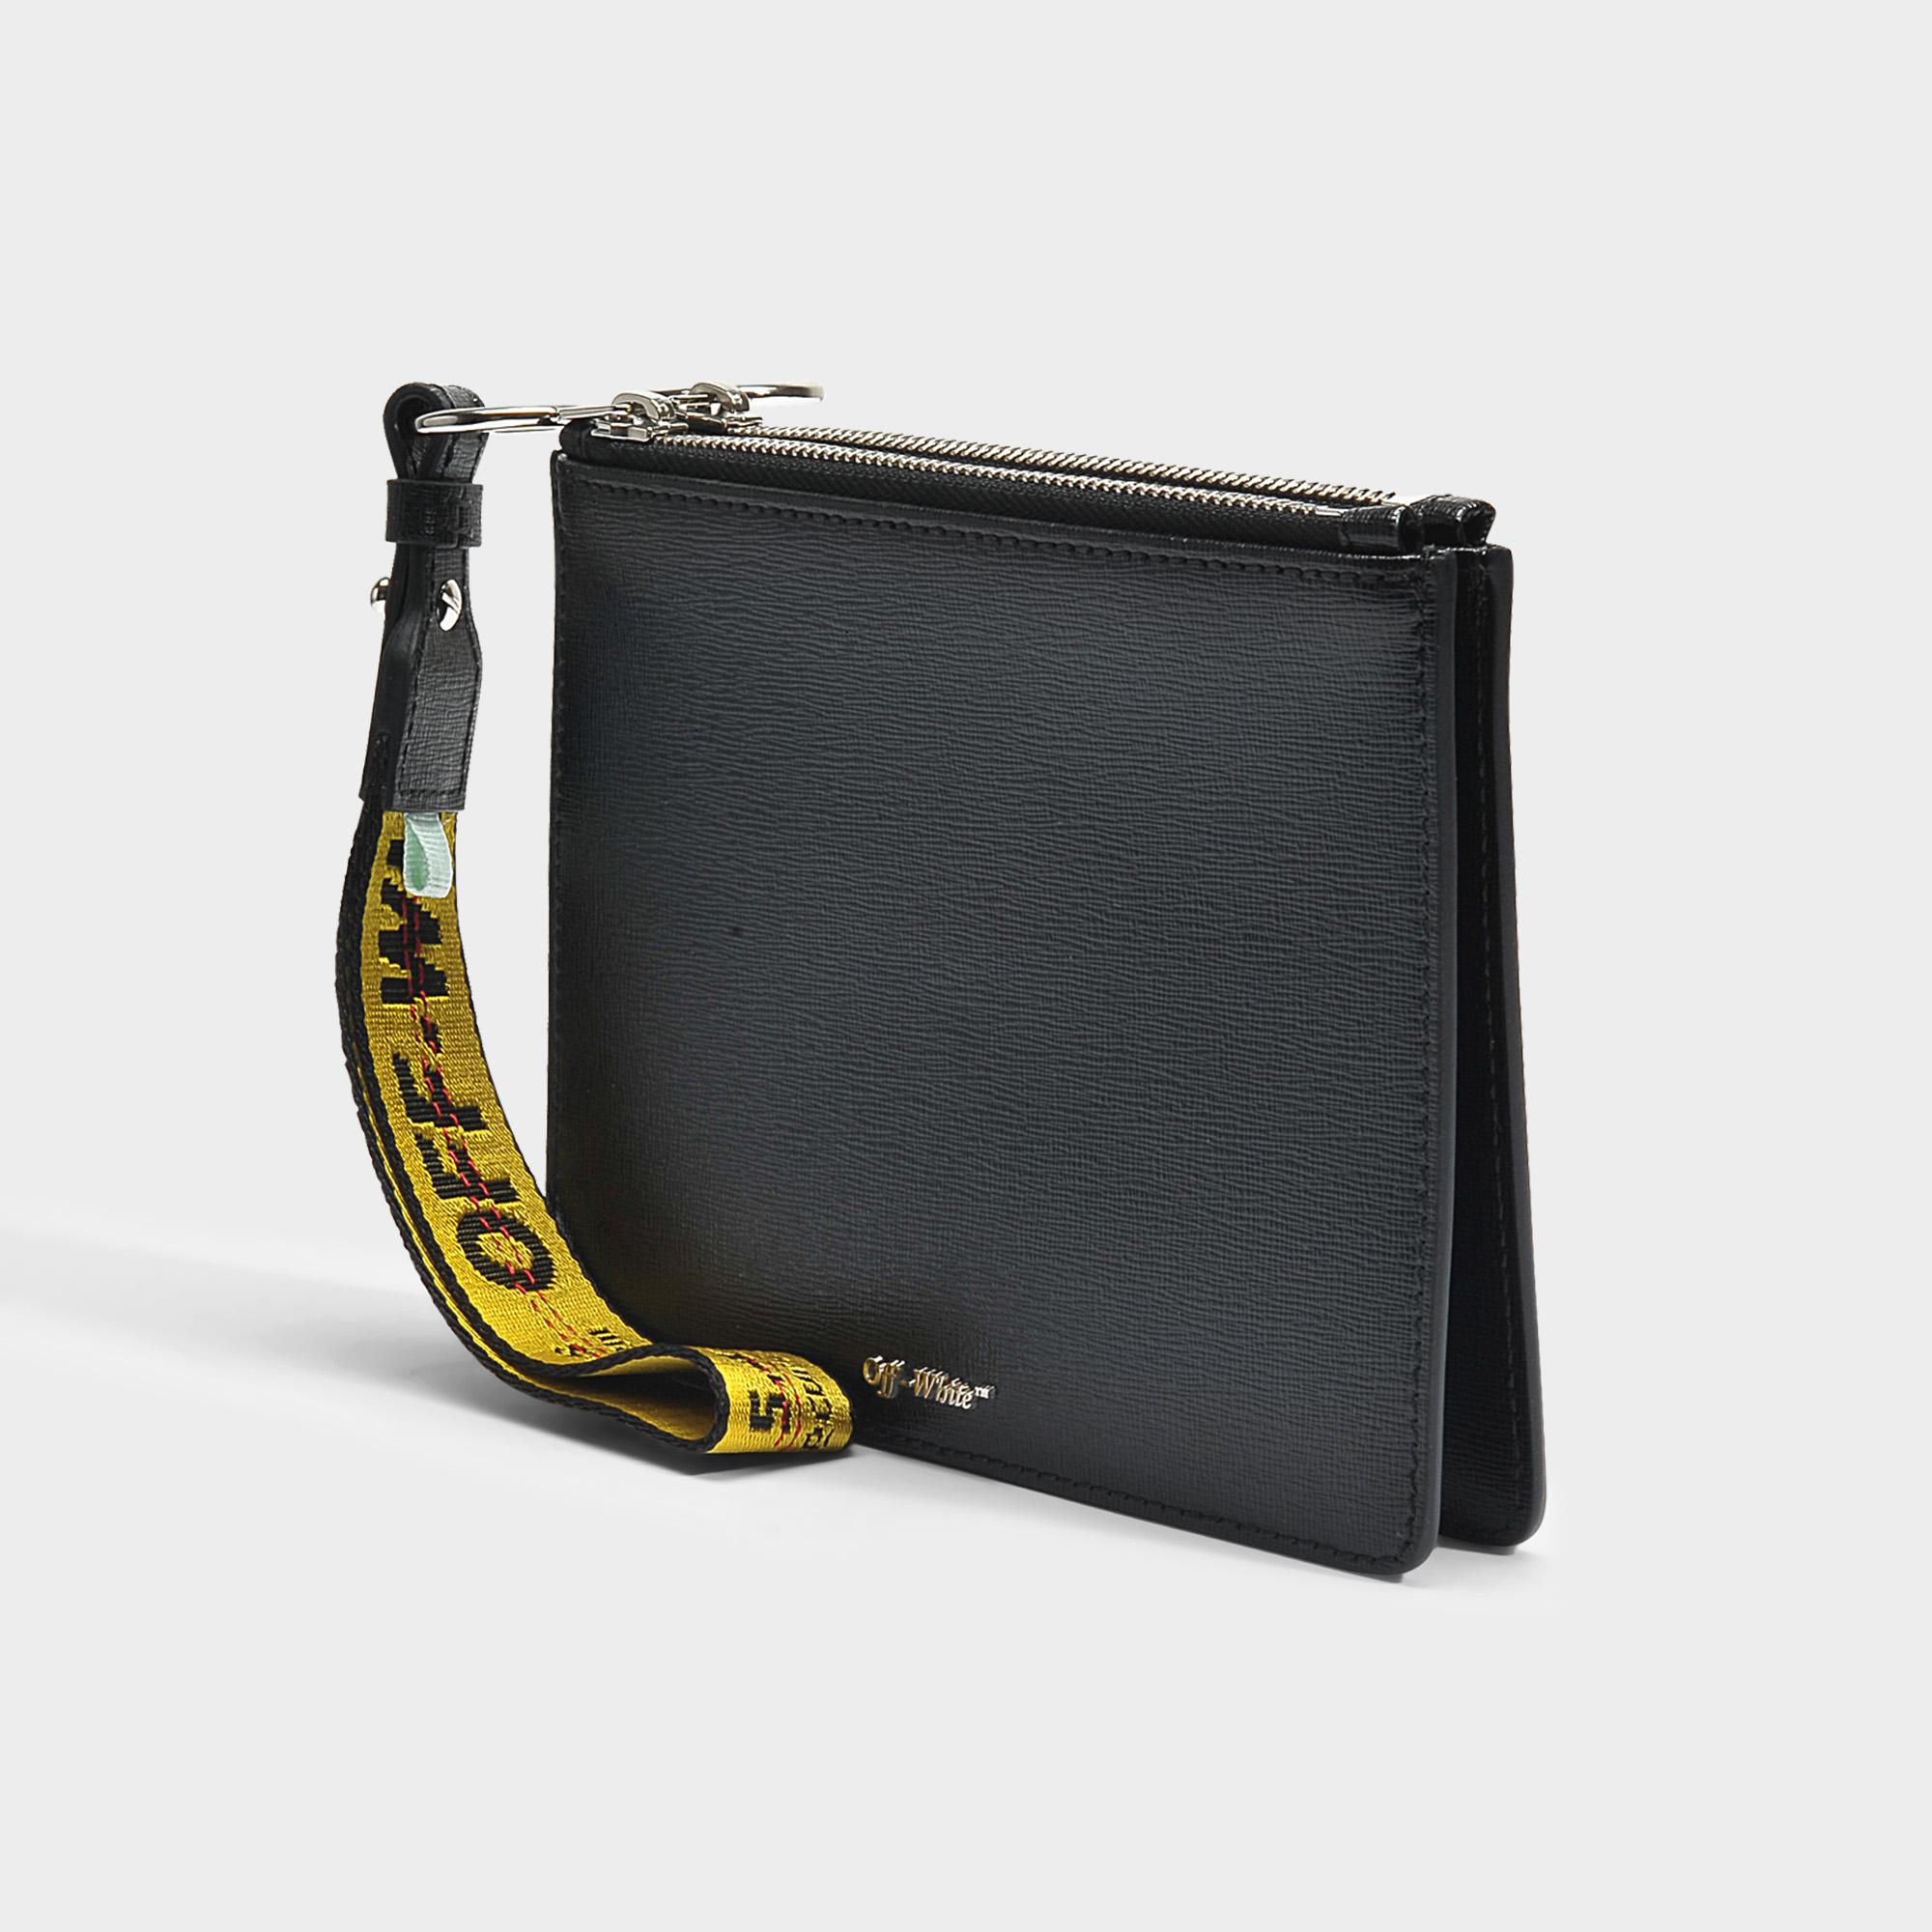 Off-White c/o Virgil Abloh Flat Double Leather Pouch in Black